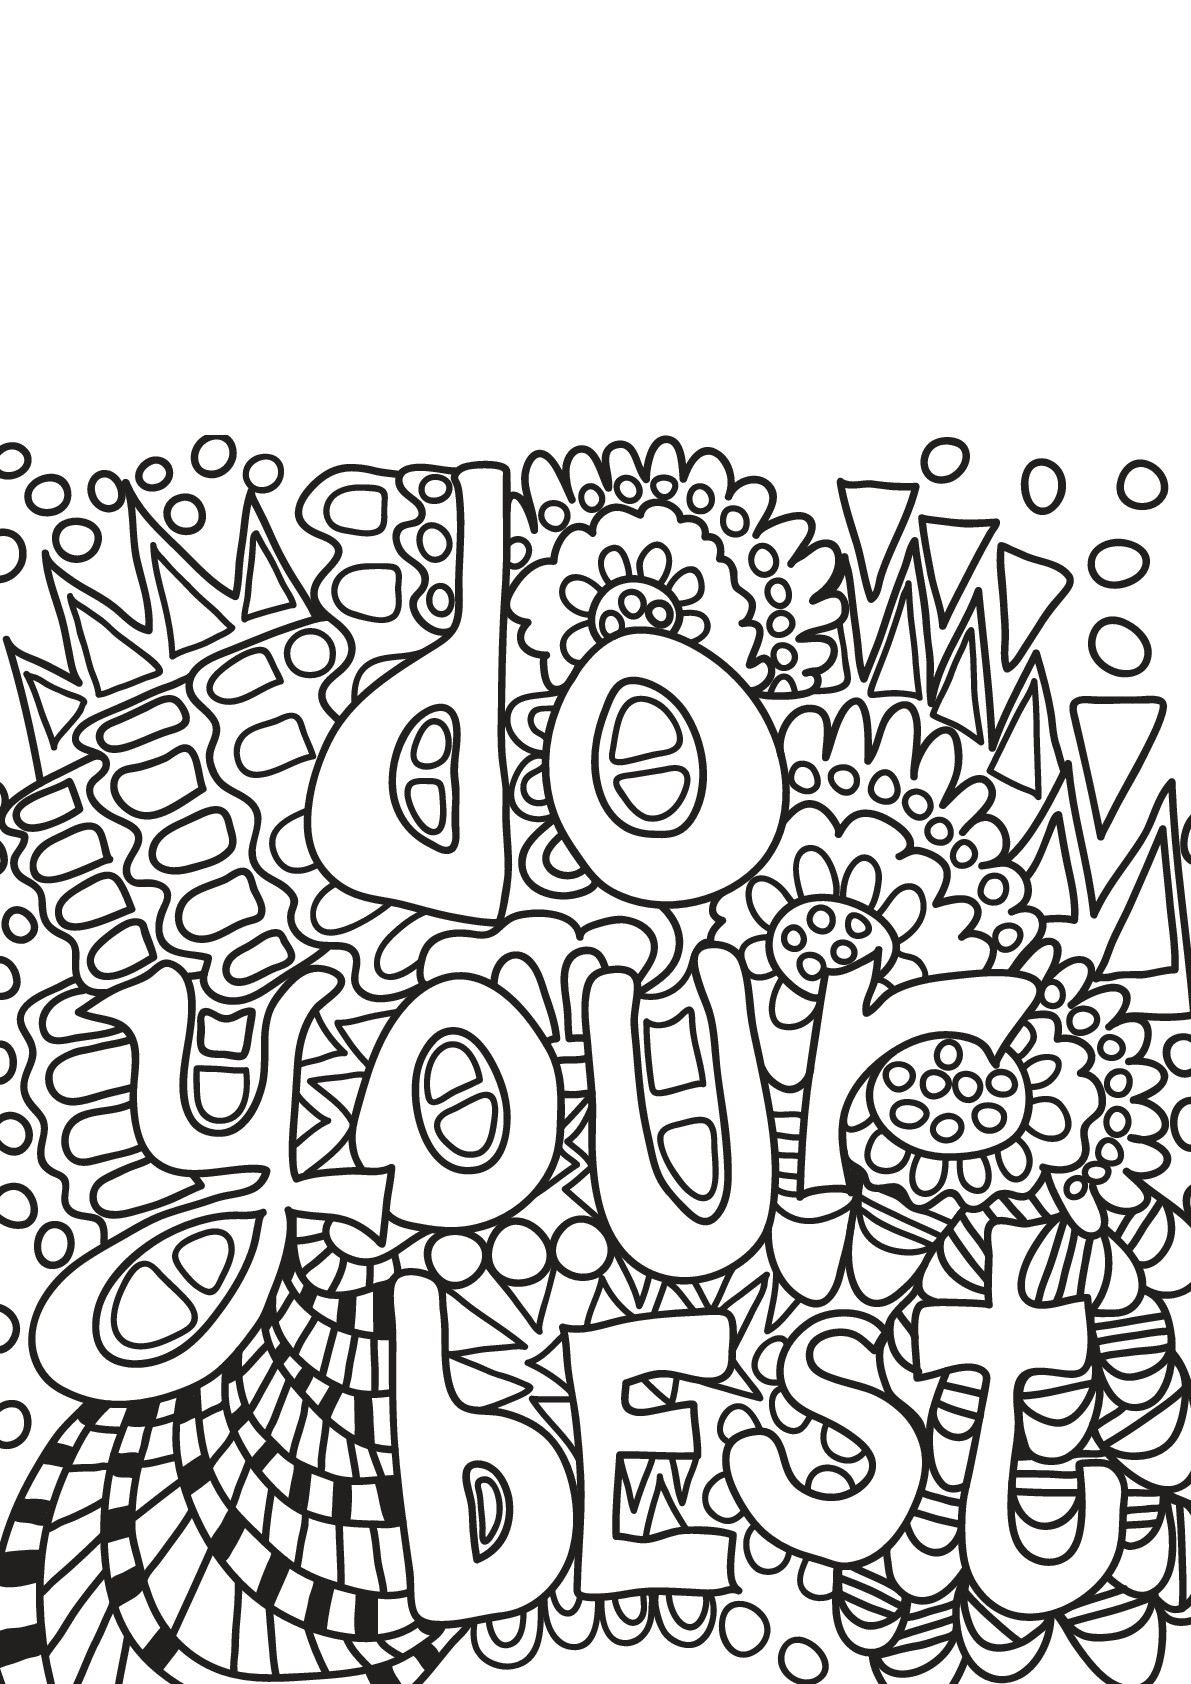 Adult Coloring Pages Quotes
 Free book quote 17 Quotes Adult Coloring Pages